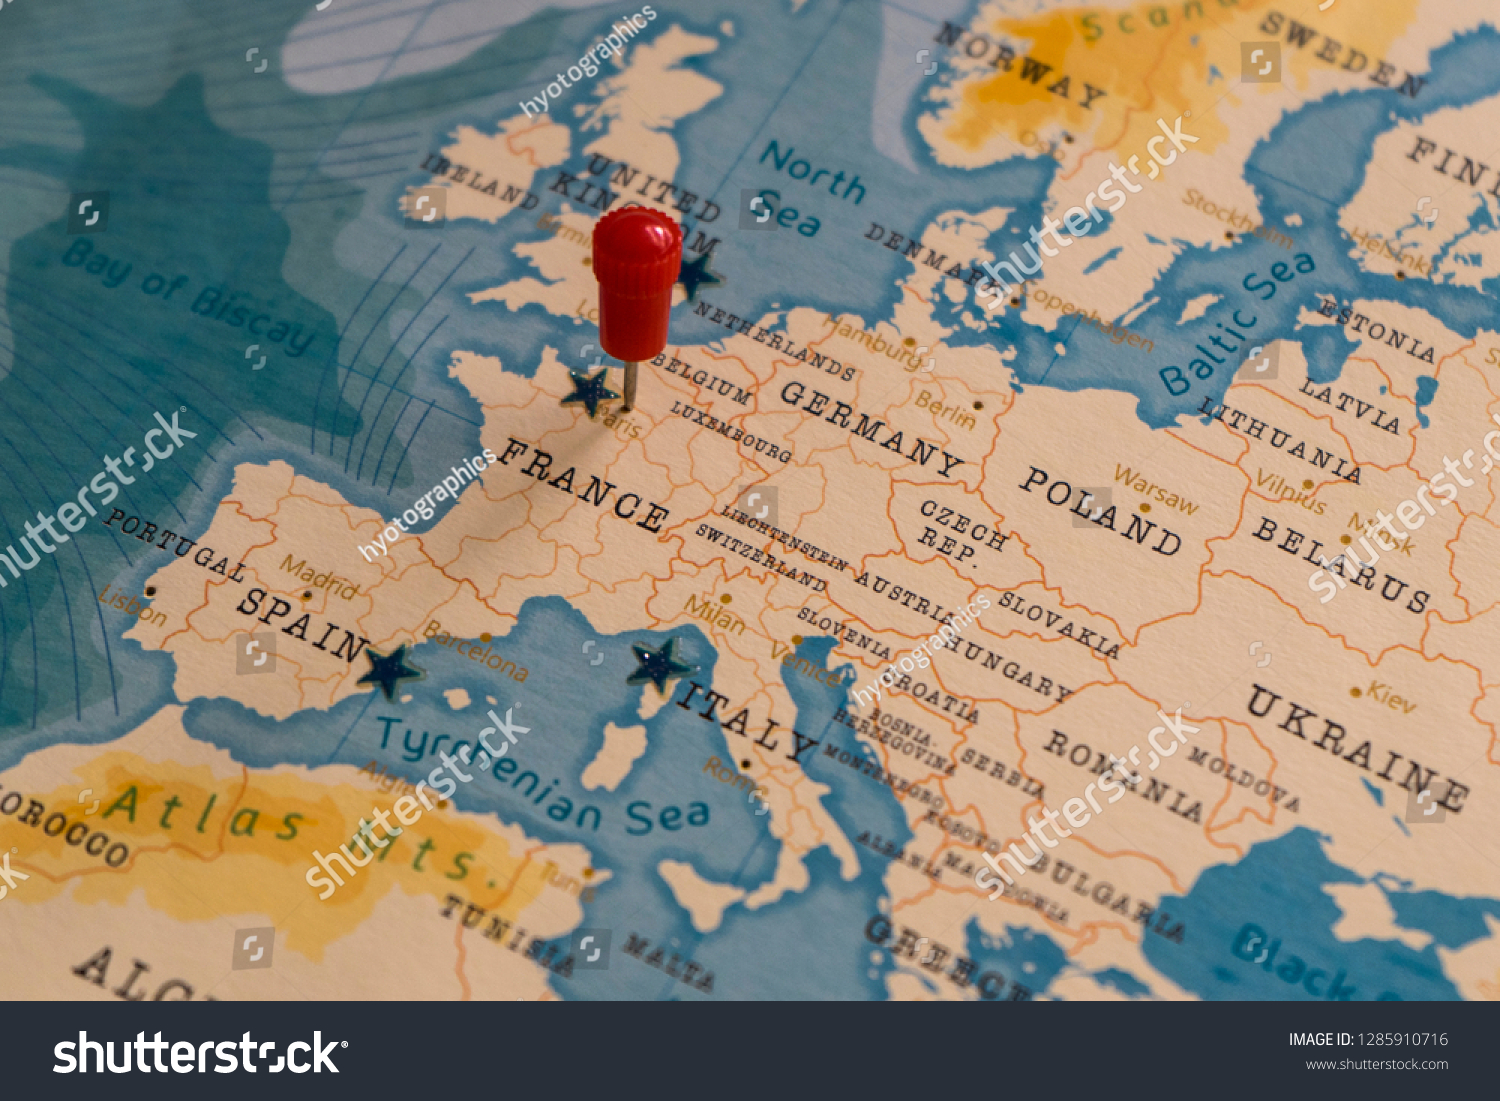 Stock Photo A Pin On Paris France In The World Map 1285910716 